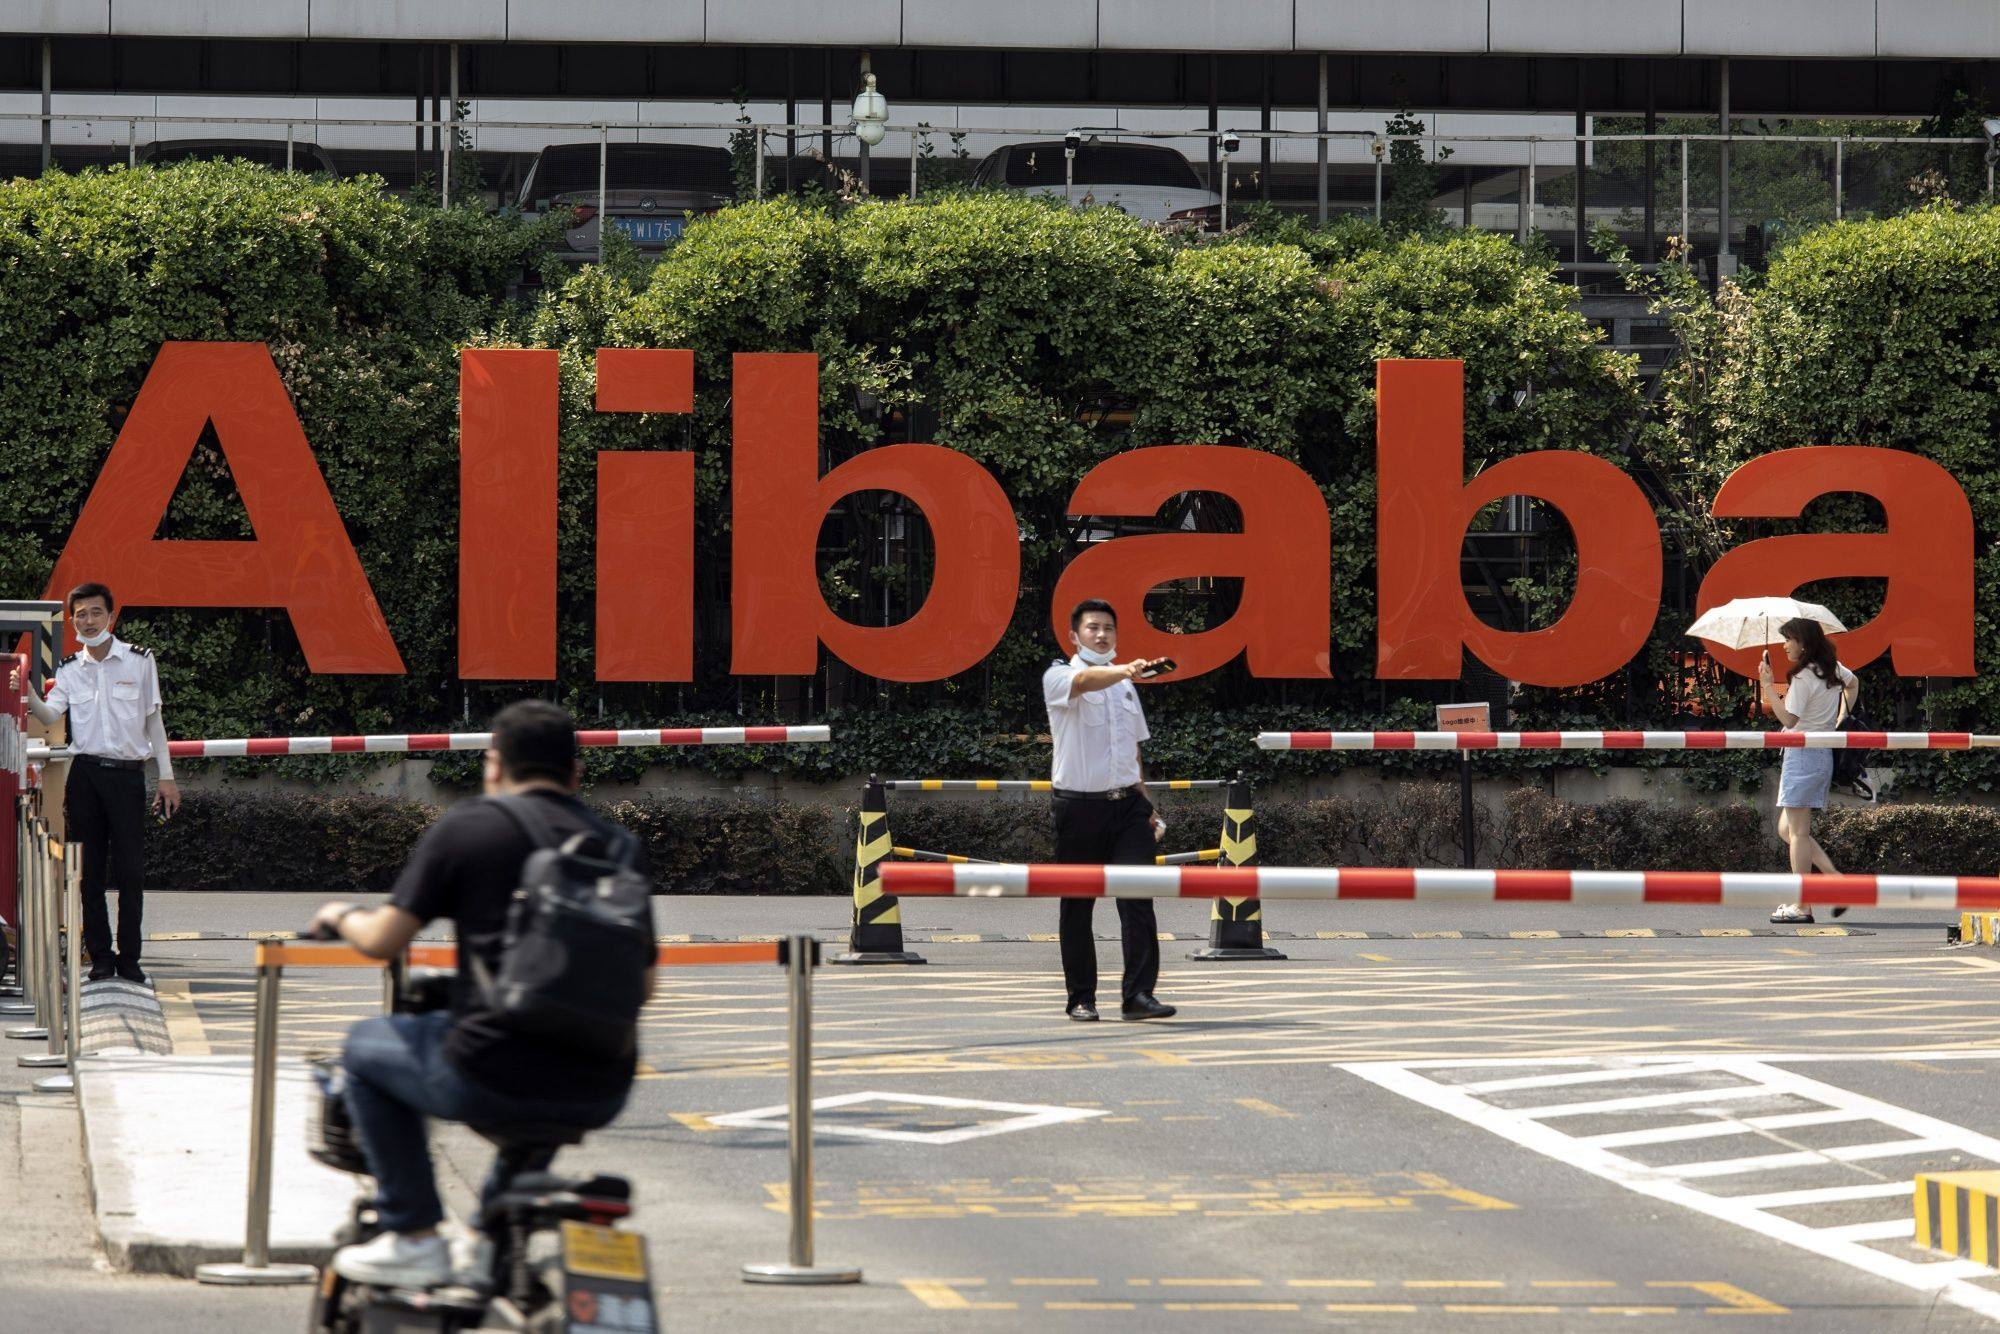 The Alibaba Group Holding headquarters in Hangzhou. Photo: Bloomberg